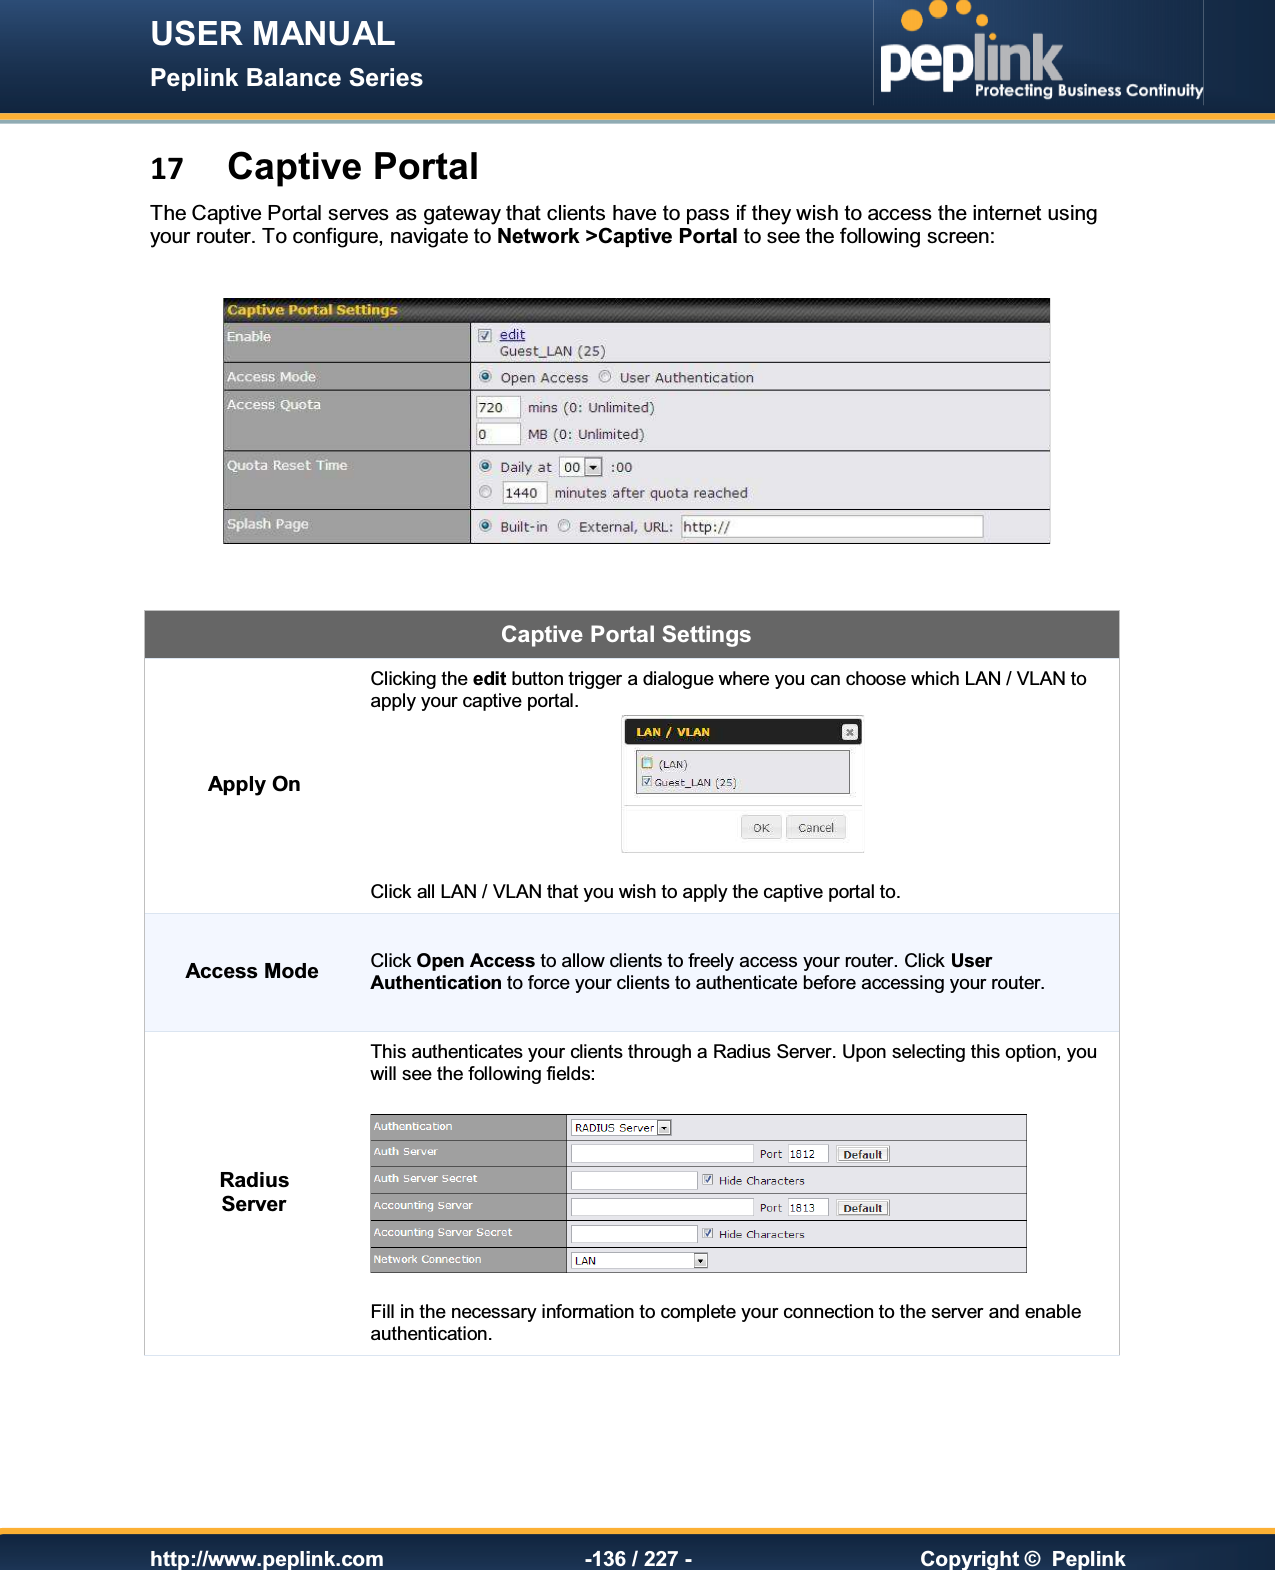 USER MANUAL Peplink Balance Series   http://www.peplink.com -136 / 227 -  Copyright ©  Peplink 17 Captive Portal The Captive Portal serves as gateway that clients have to pass if they wish to access the internet using your router. To configure, navigate to Network &gt;Captive Portal to see the following screen:       Captive Portal Settings Apply On Clicking the edit button trigger a dialogue where you can choose which LAN / VLAN to apply your captive portal.   Click all LAN / VLAN that you wish to apply the captive portal to. Access Mode Click Open Access to allow clients to freely access your router. Click User Authentication to force your clients to authenticate before accessing your router. Radius Server This authenticates your clients through a Radius Server. Upon selecting this option, you will see the following fields:    Fill in the necessary information to complete your connection to the server and enable authentication. 